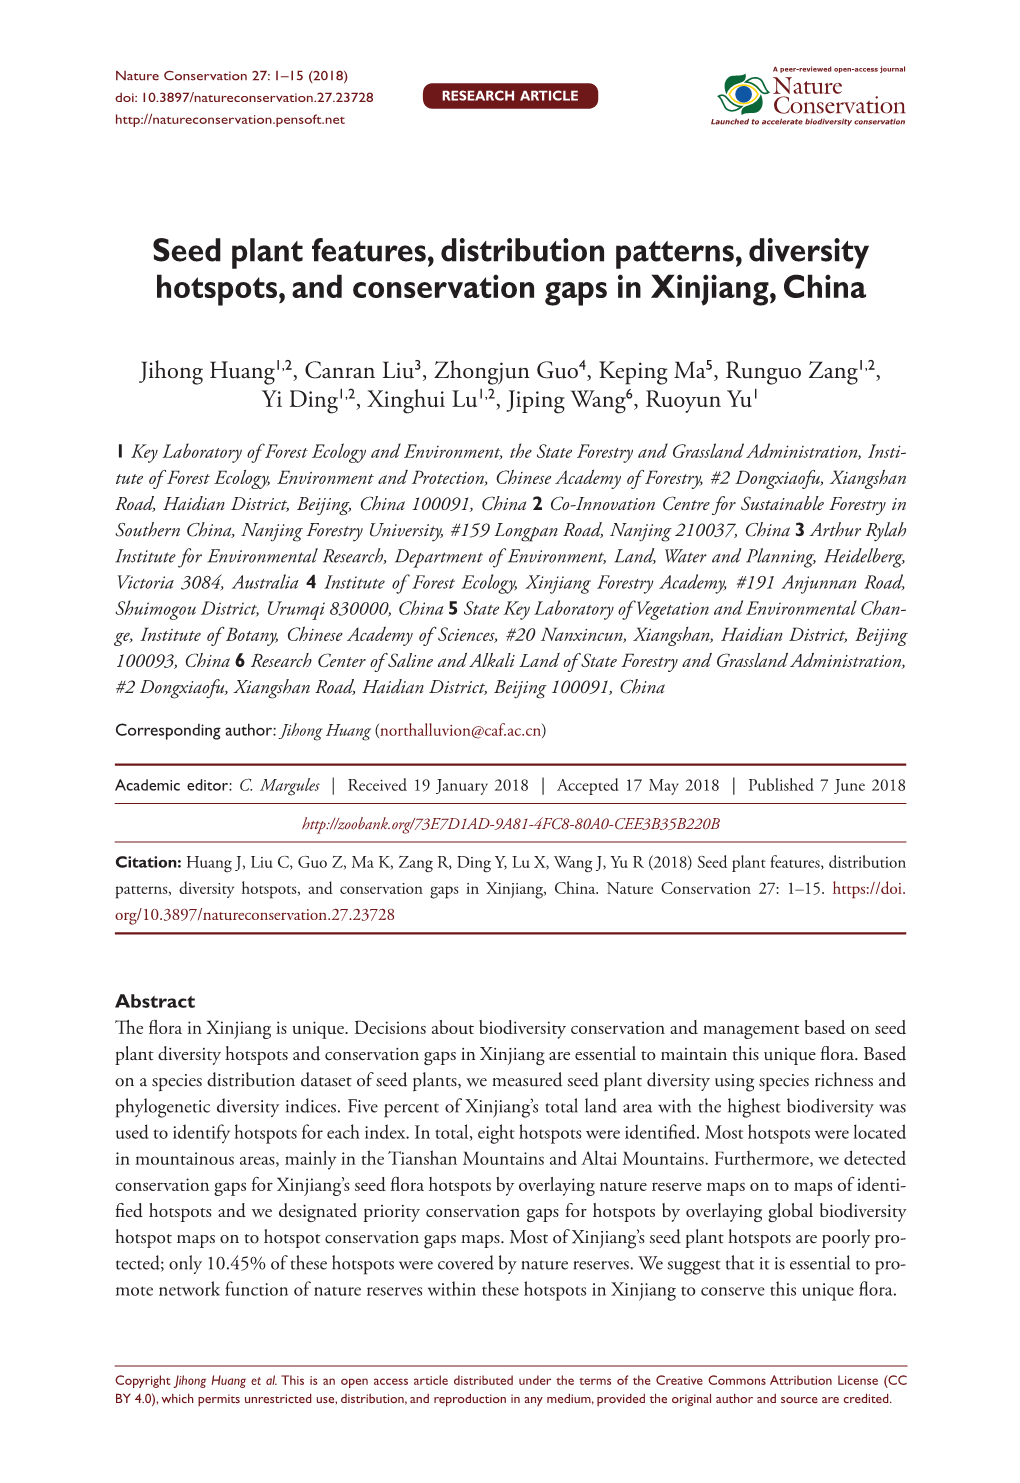 Seed Plant Features, Distribution Patterns, Diversity Hotspots, and Conservation Gaps in Xinjiang, China